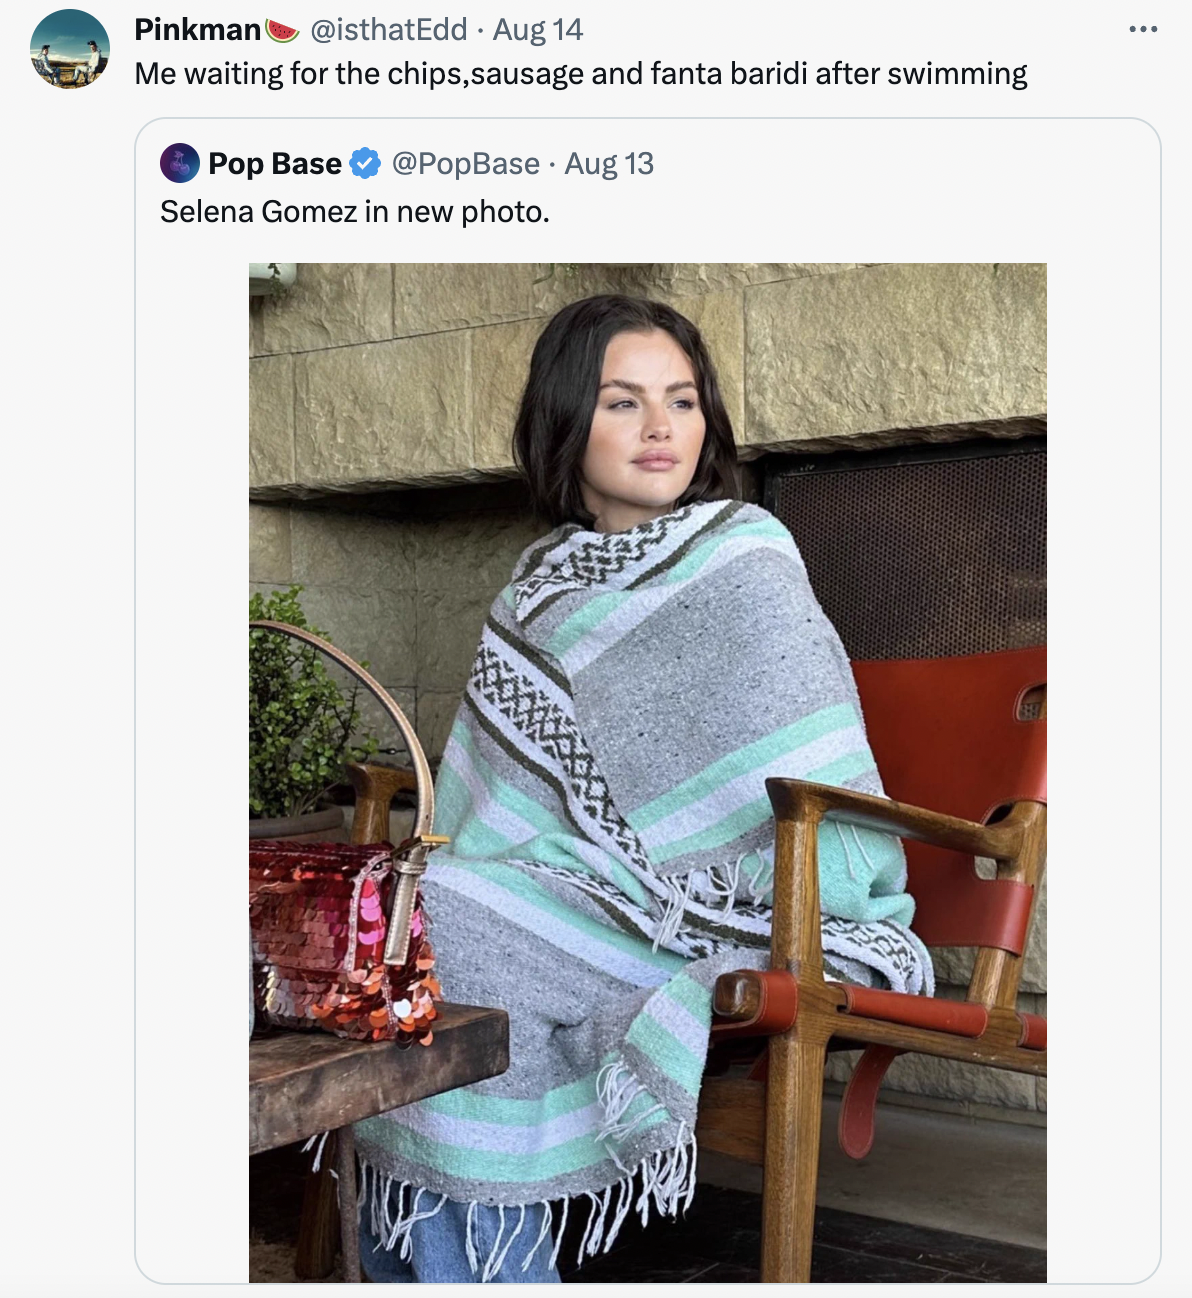 selena gomez in a blanket - stole - Pinkman . Aug 14 Me waiting for the chips, sausage and fanta baridi after swimming Pop Base Aug 13 Selena Gomez in new photo. 2774 !